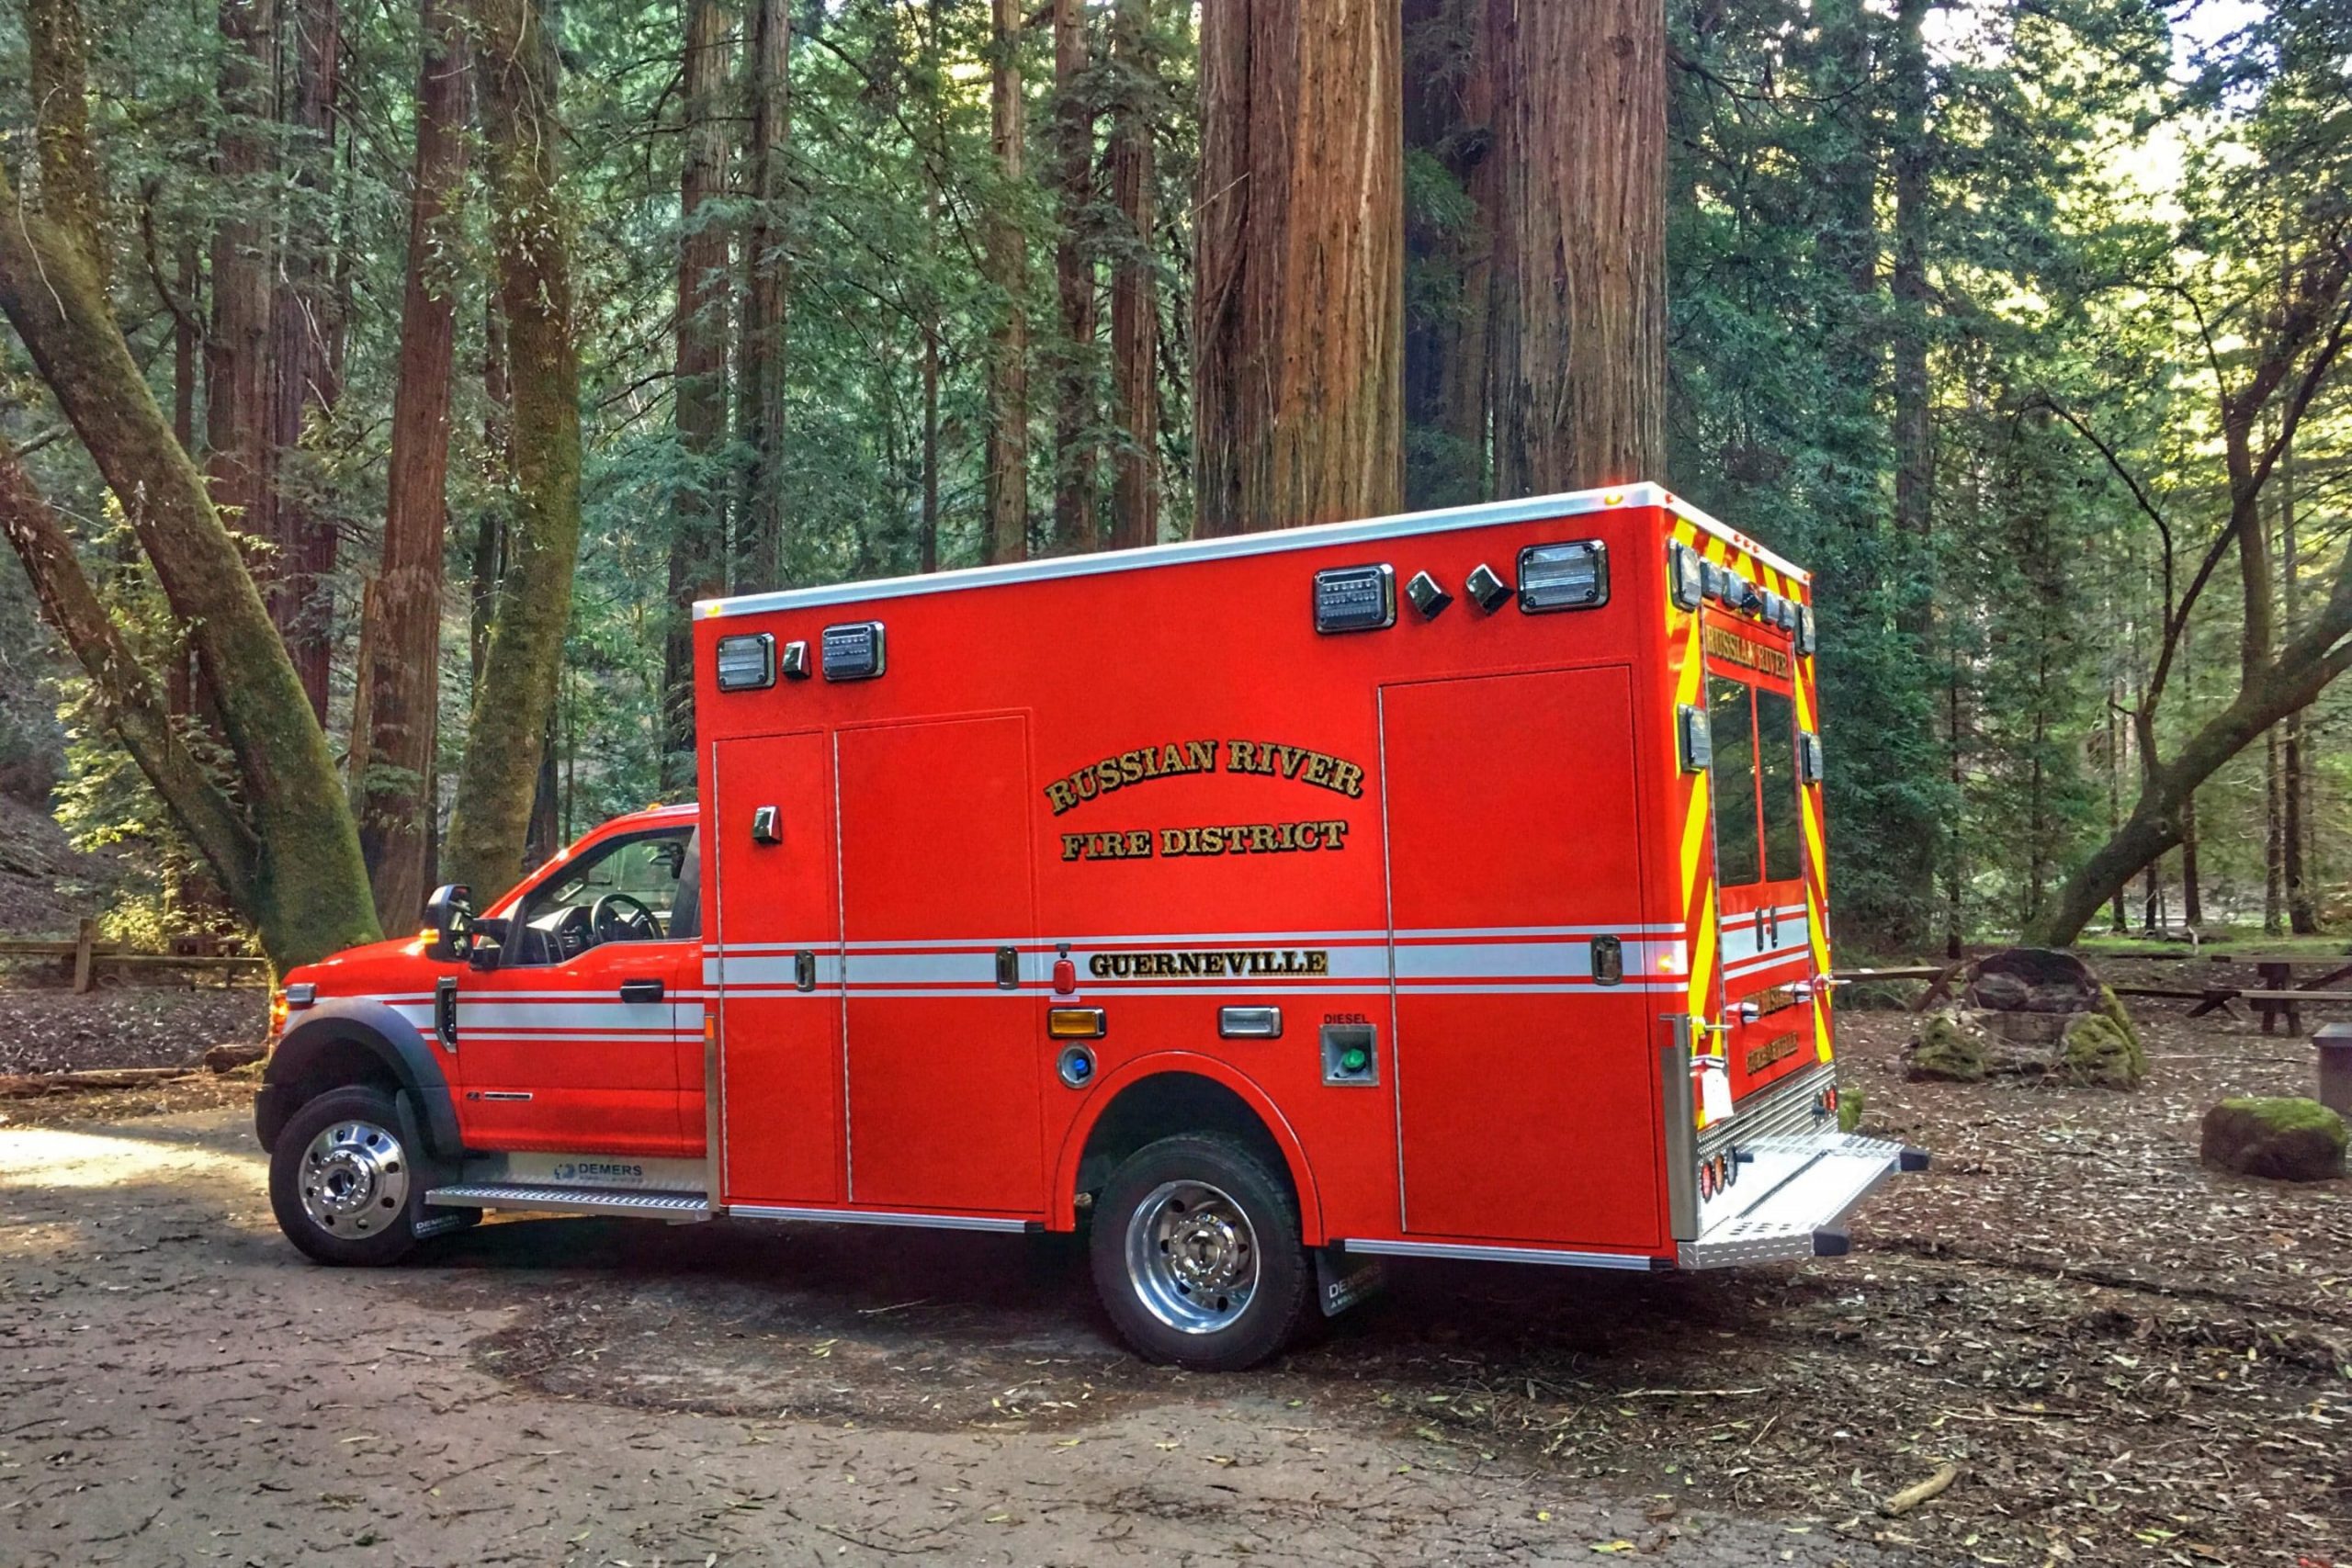 Russian River Fire District